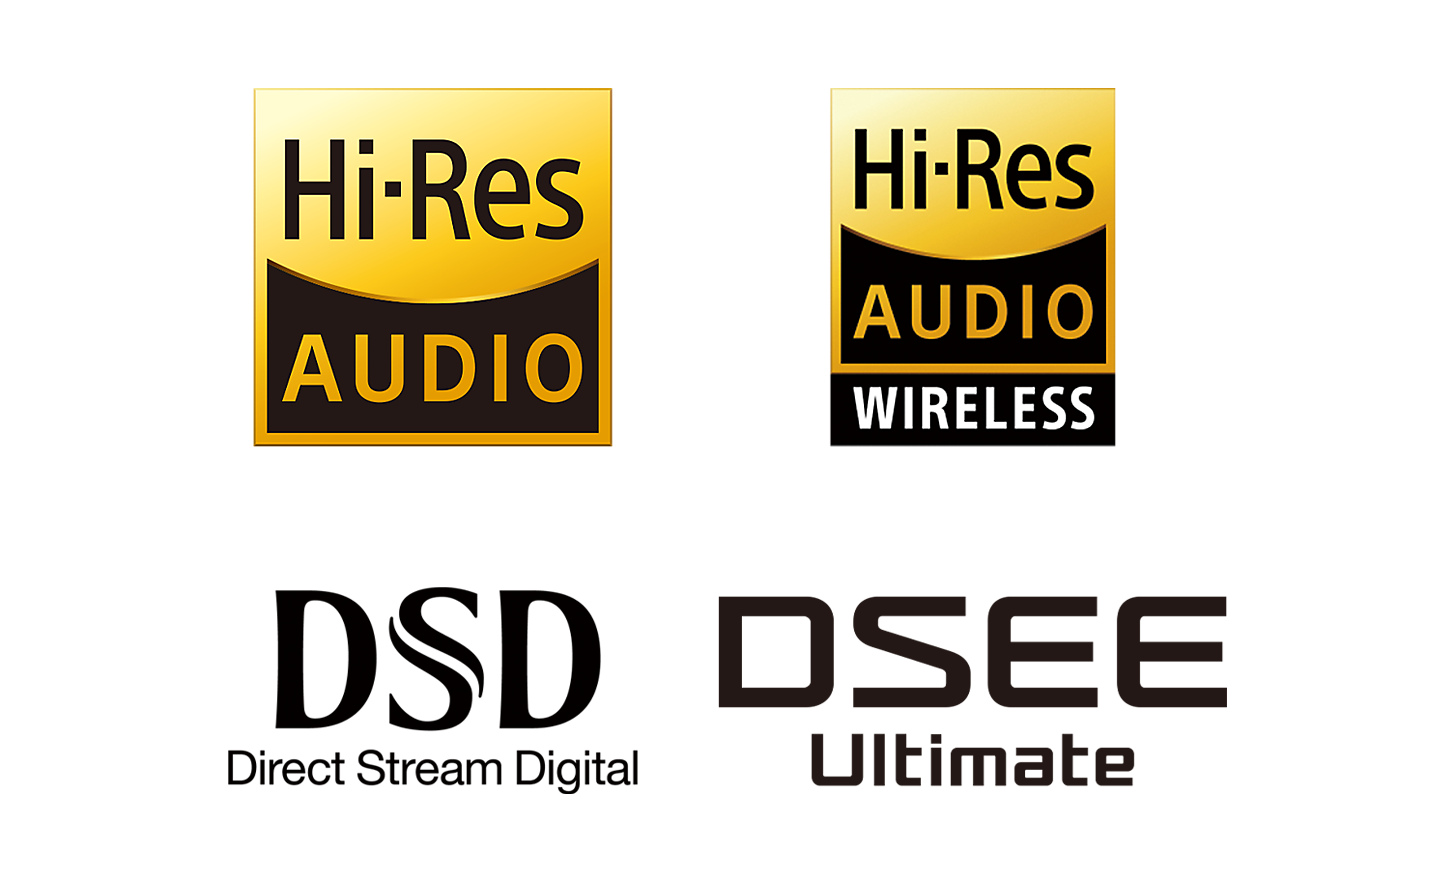 High-Res Audio, High-Res Audio WIRELESS, DSD and DSEE logos.